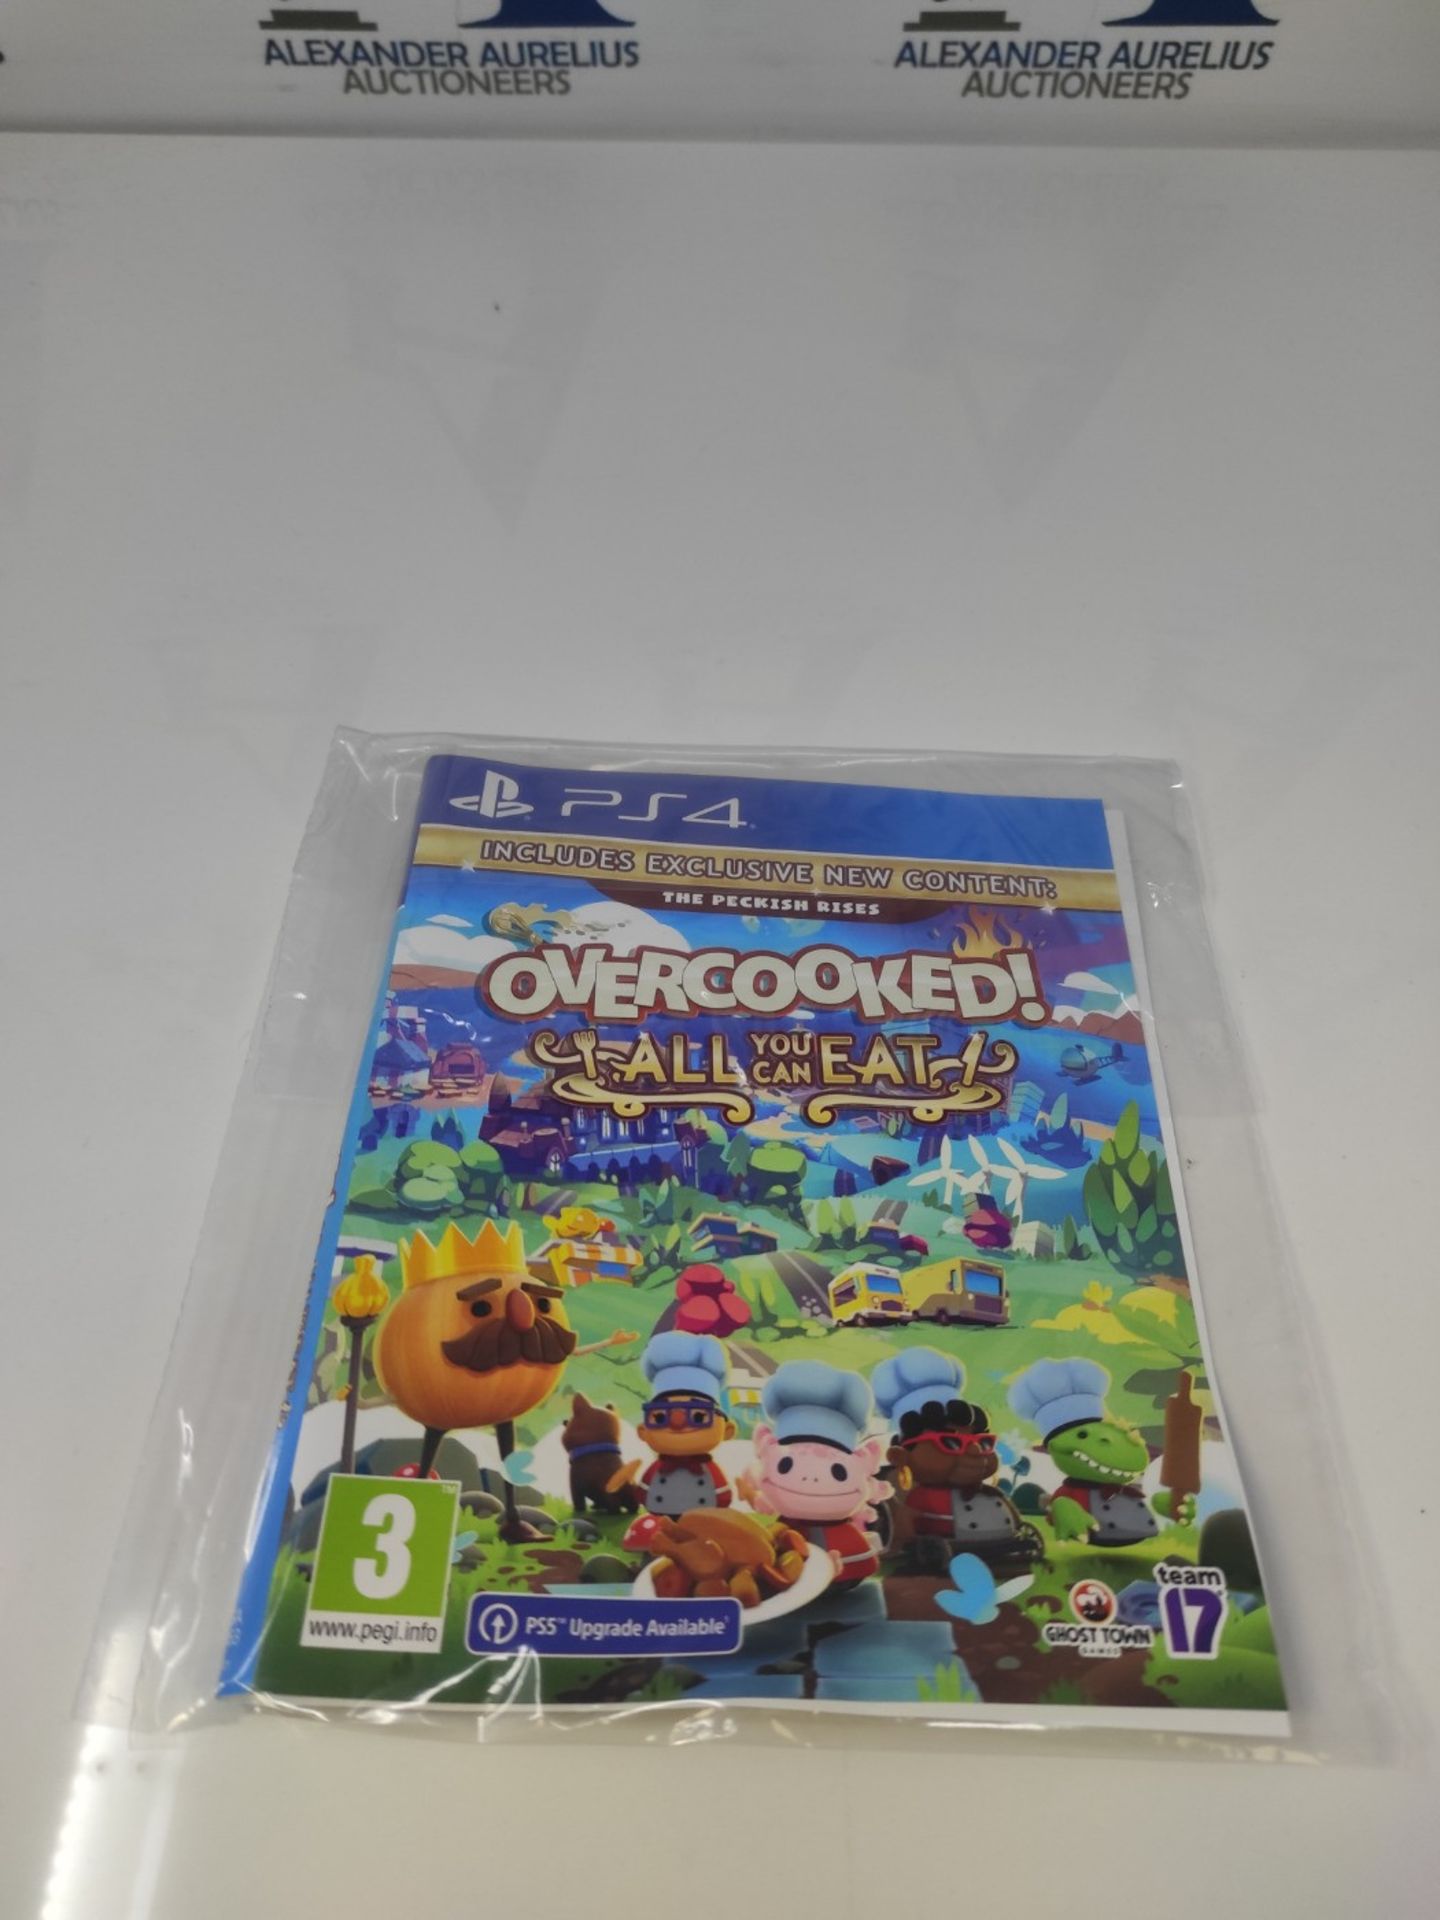 PS4 Overcooked: All You Can Eat - PlayStation 4 - Image 5 of 6